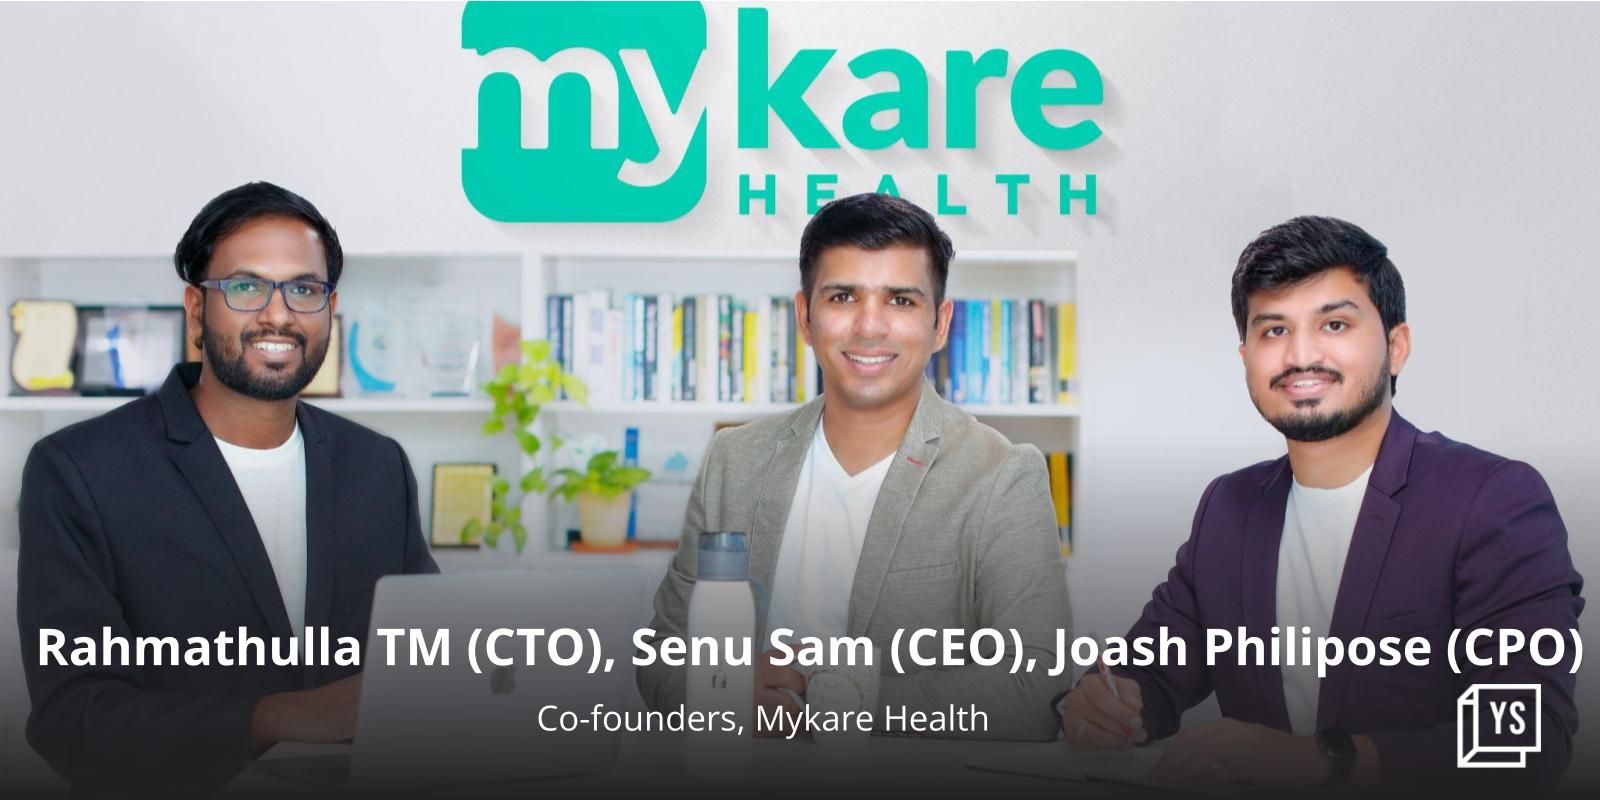 Focused on affordable healthcare, Mykare Health connects patients with small hospitals